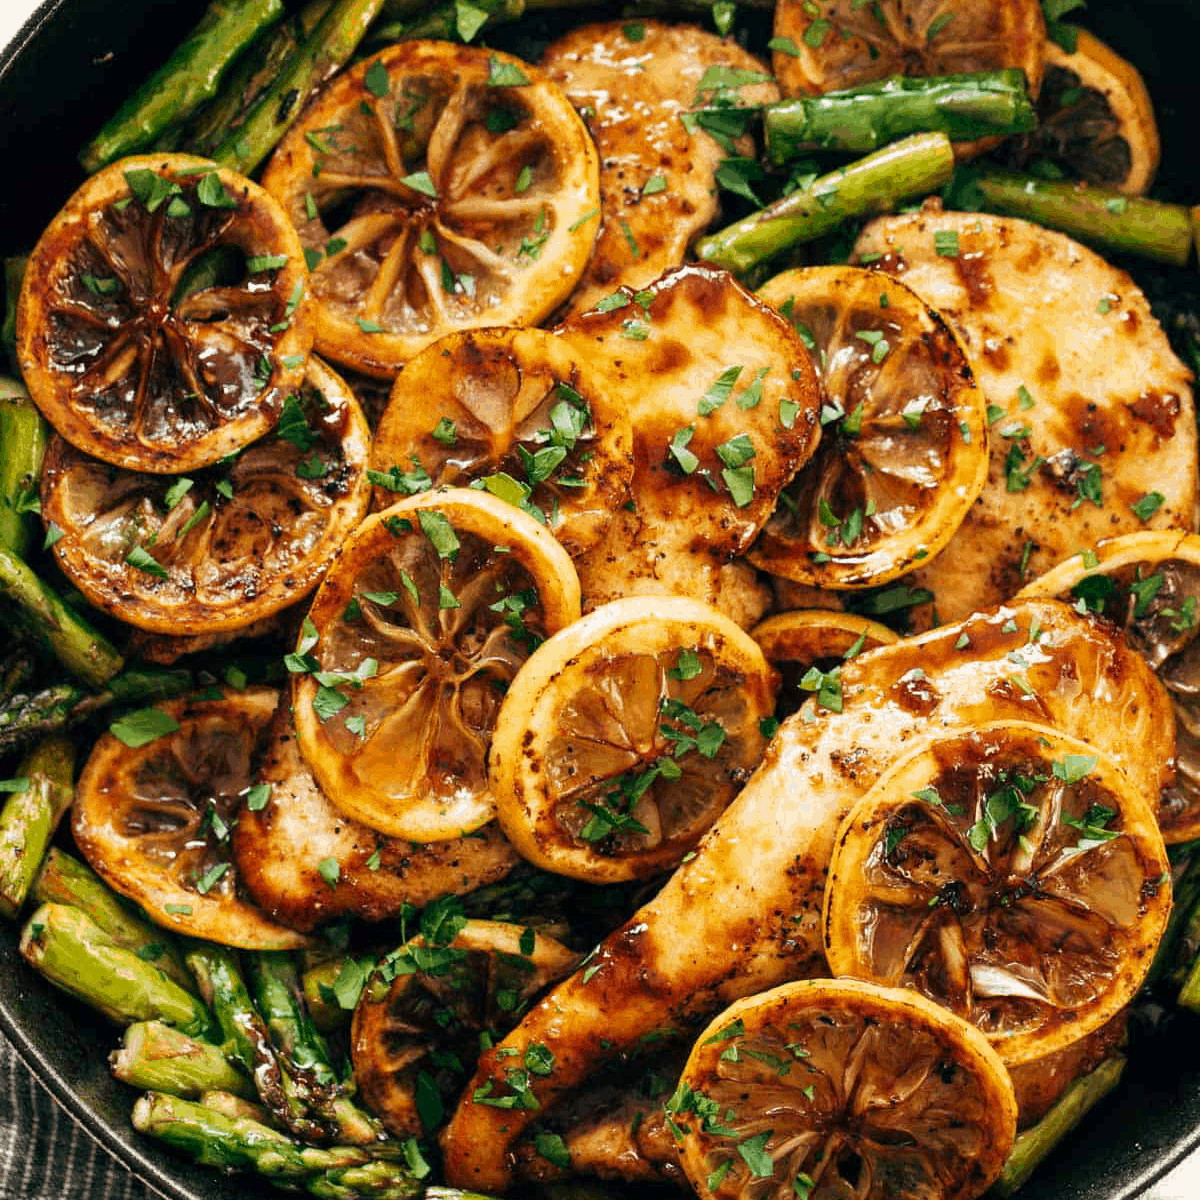 Asparagus and chicken with slices of lemon on it.